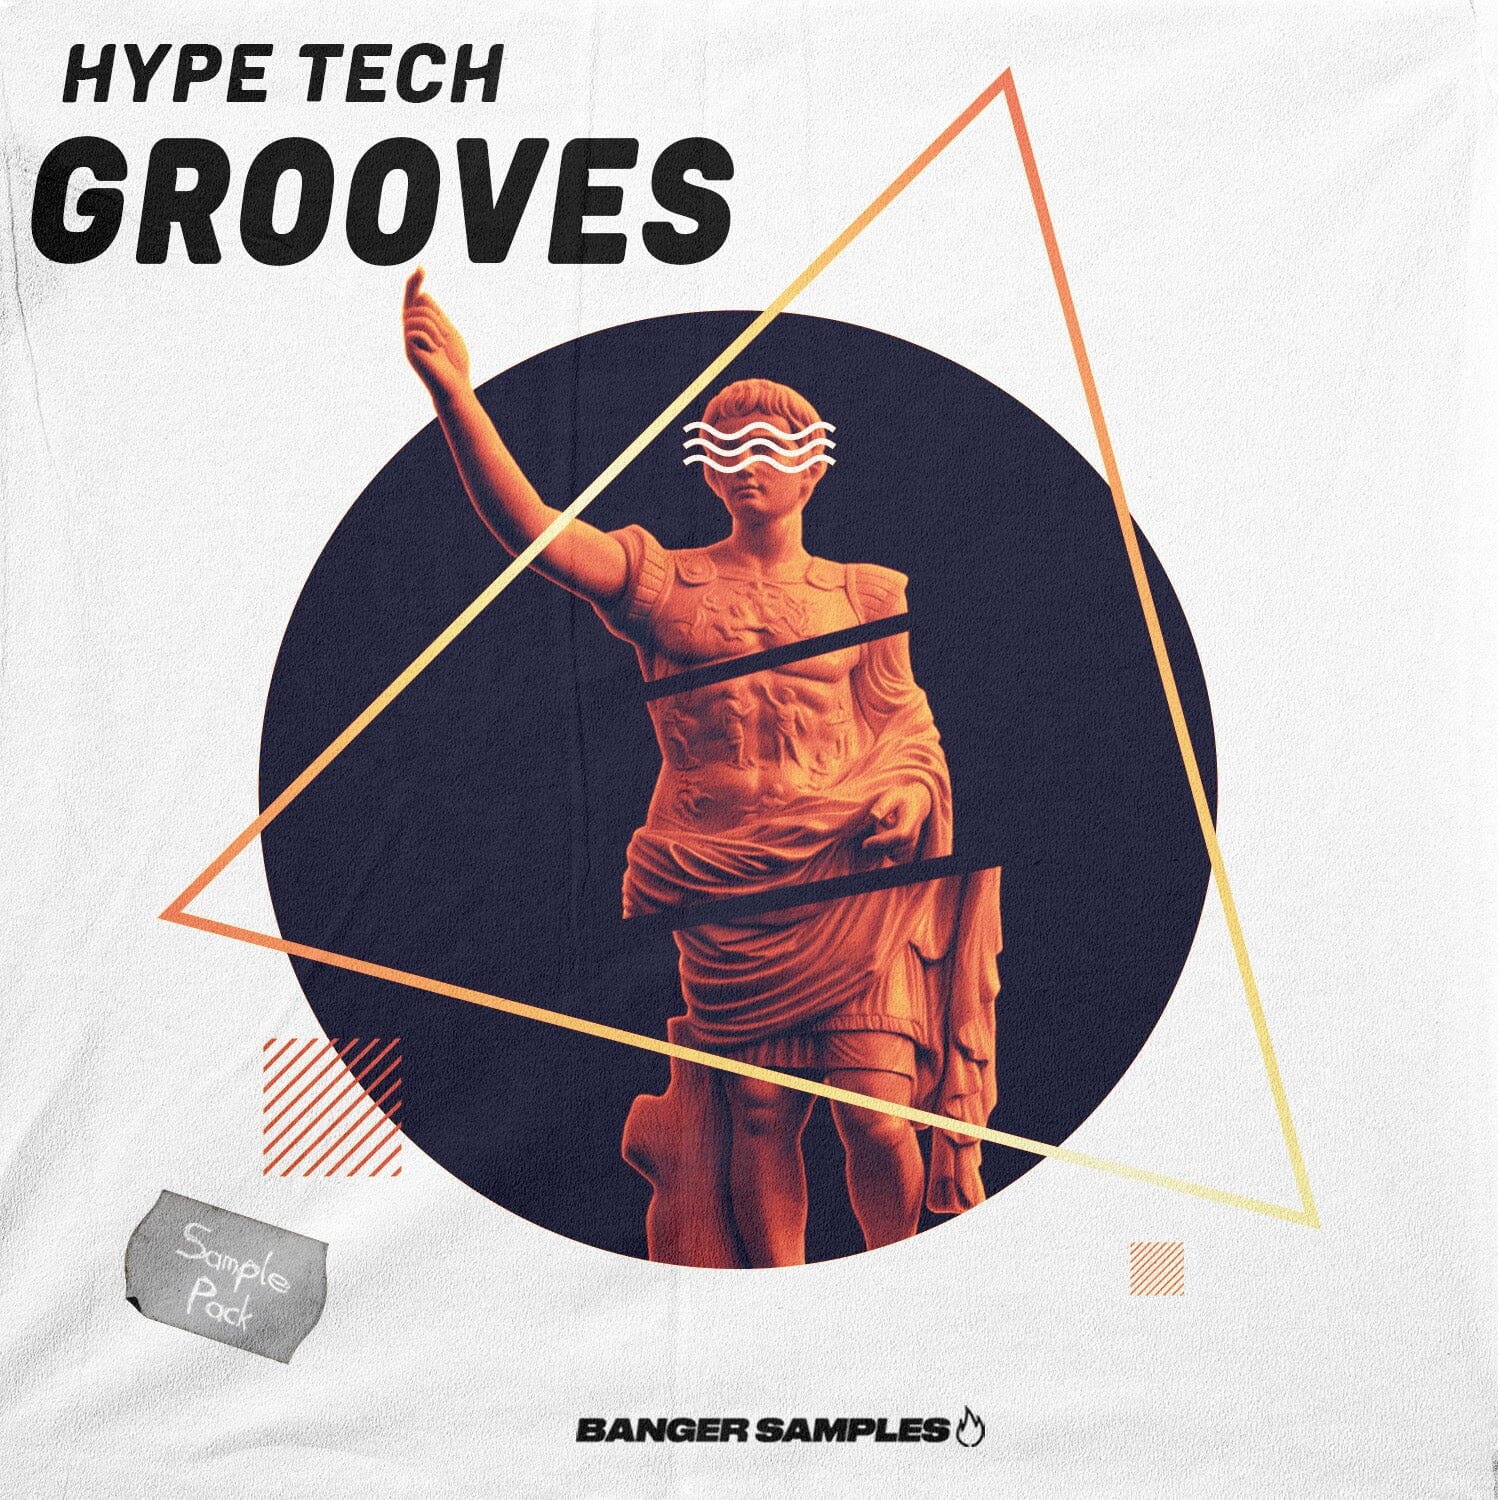 Hype Tech Grooves - Techno - Tech House (Loops, Midi and Wav Files) Sample Pack Banger Samples